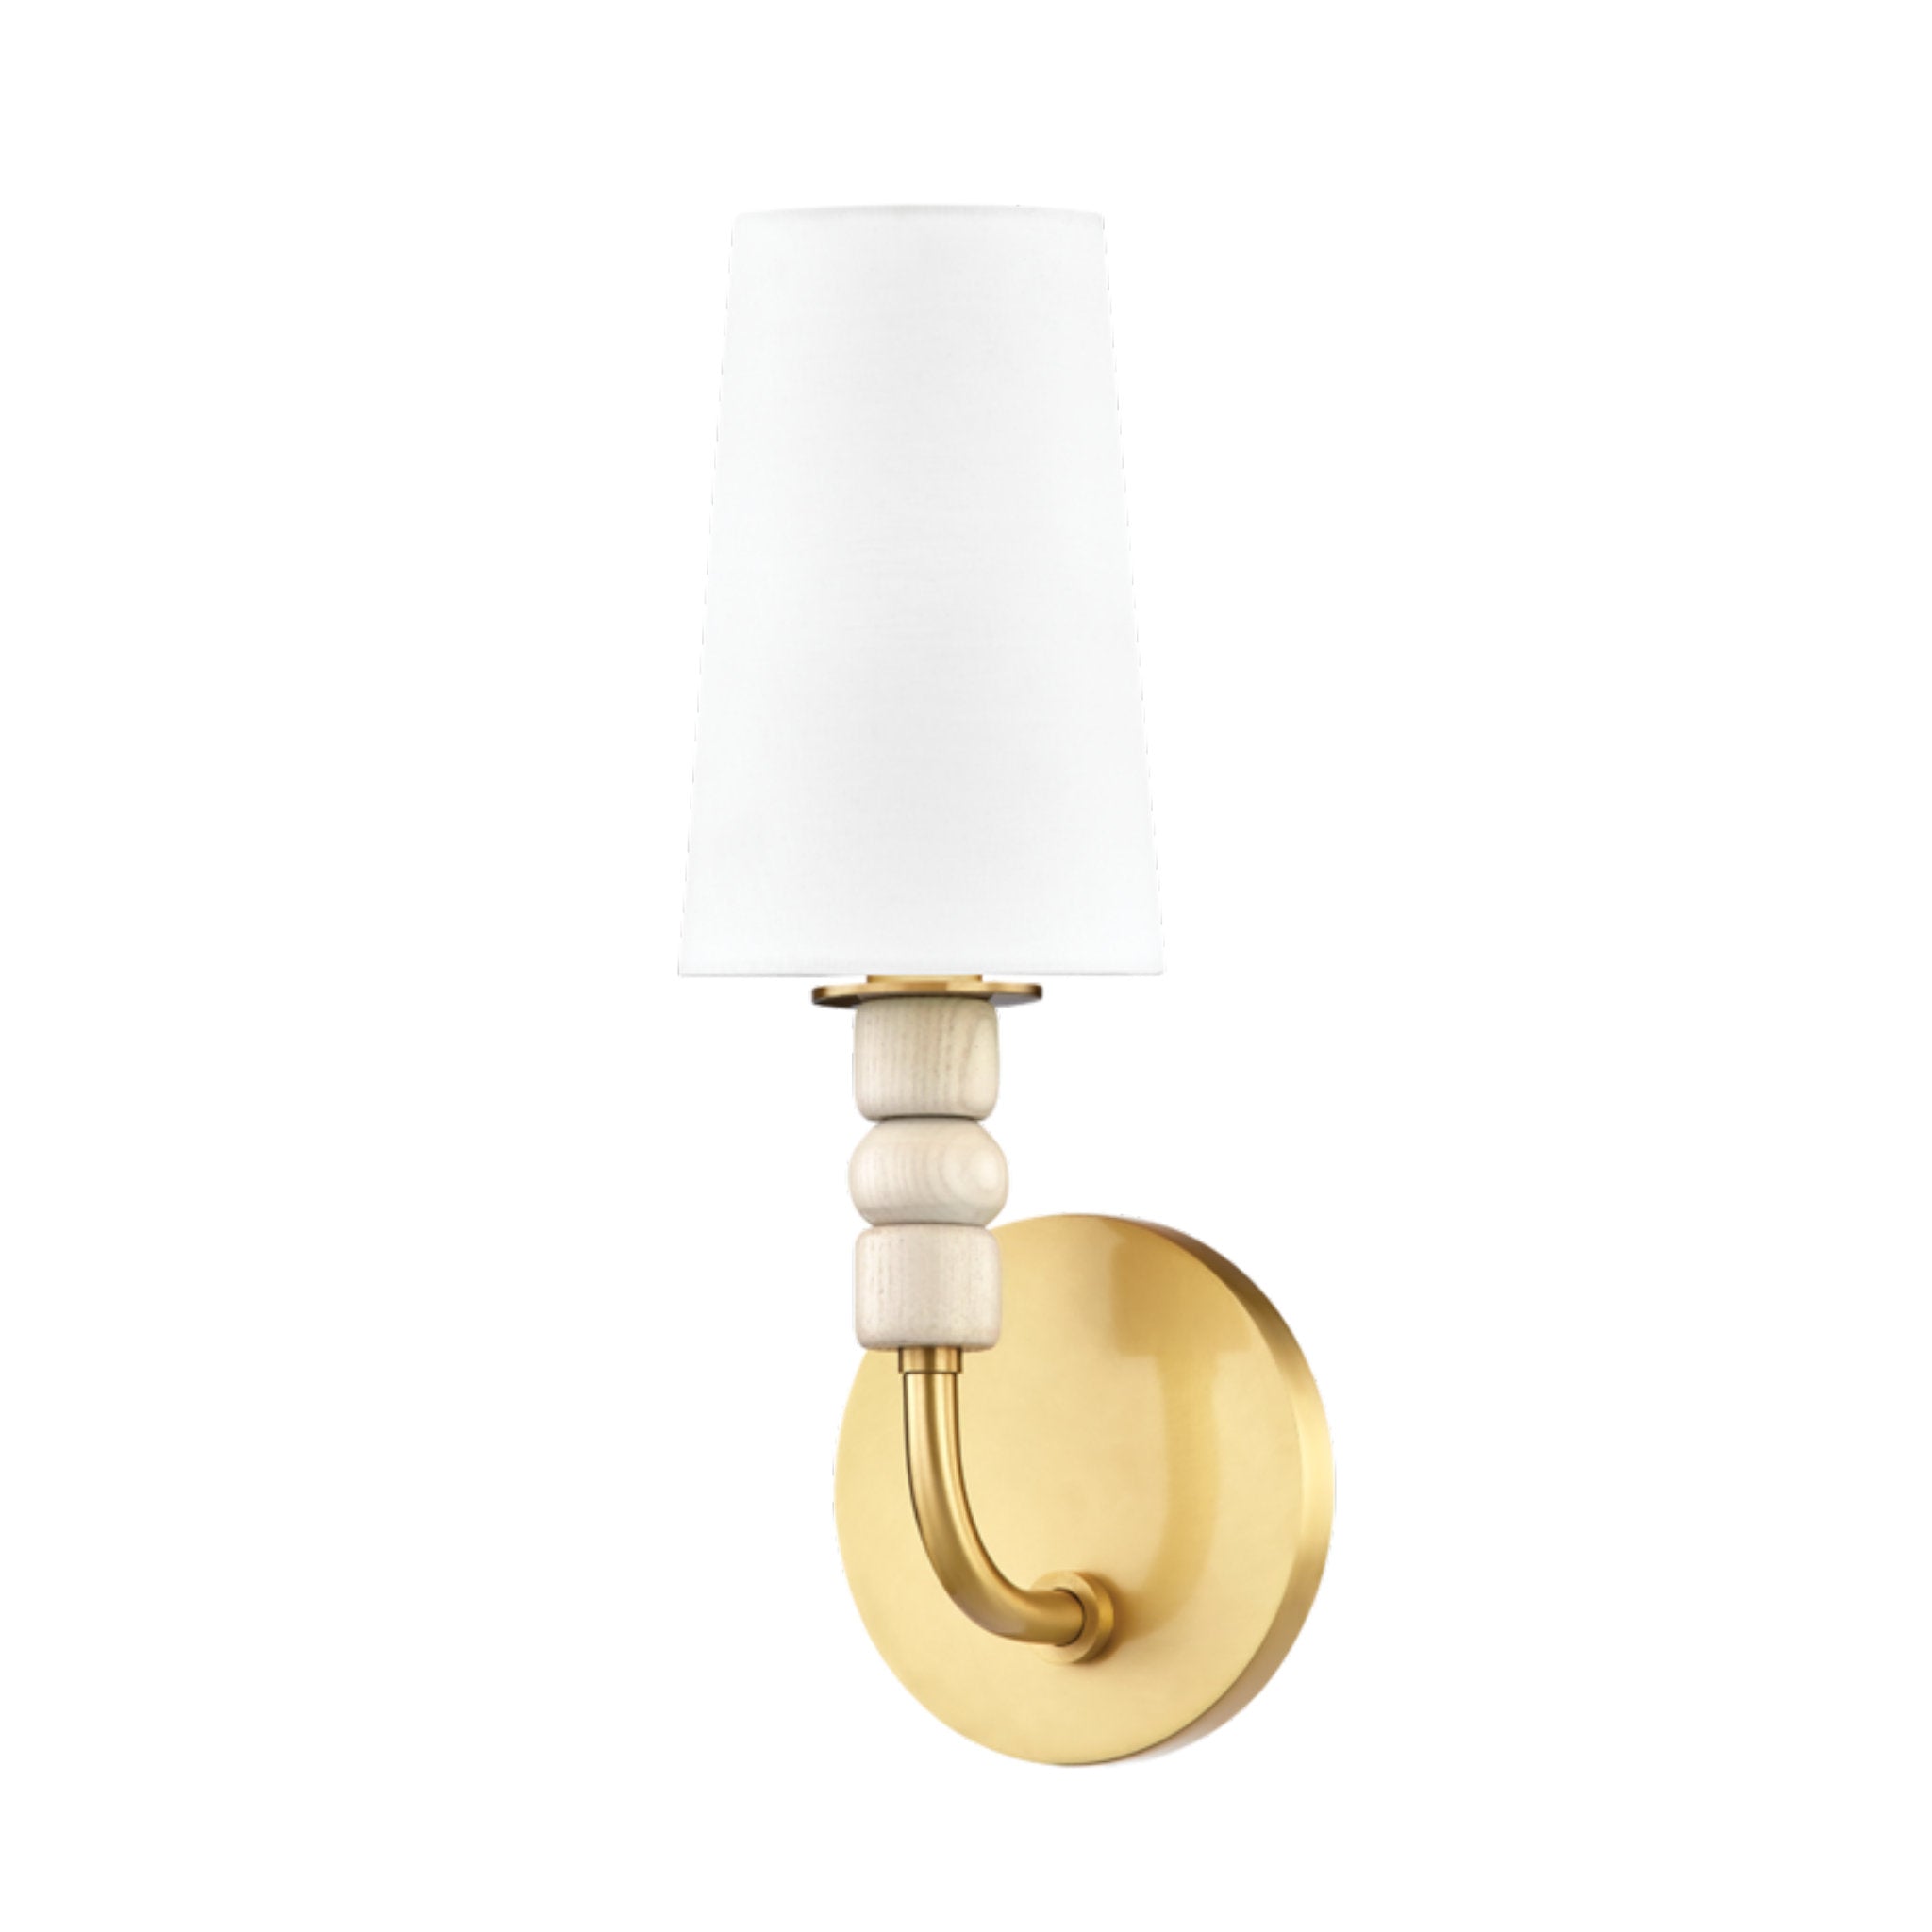 Casey 1-Light Wall Sconce in Aged Brass